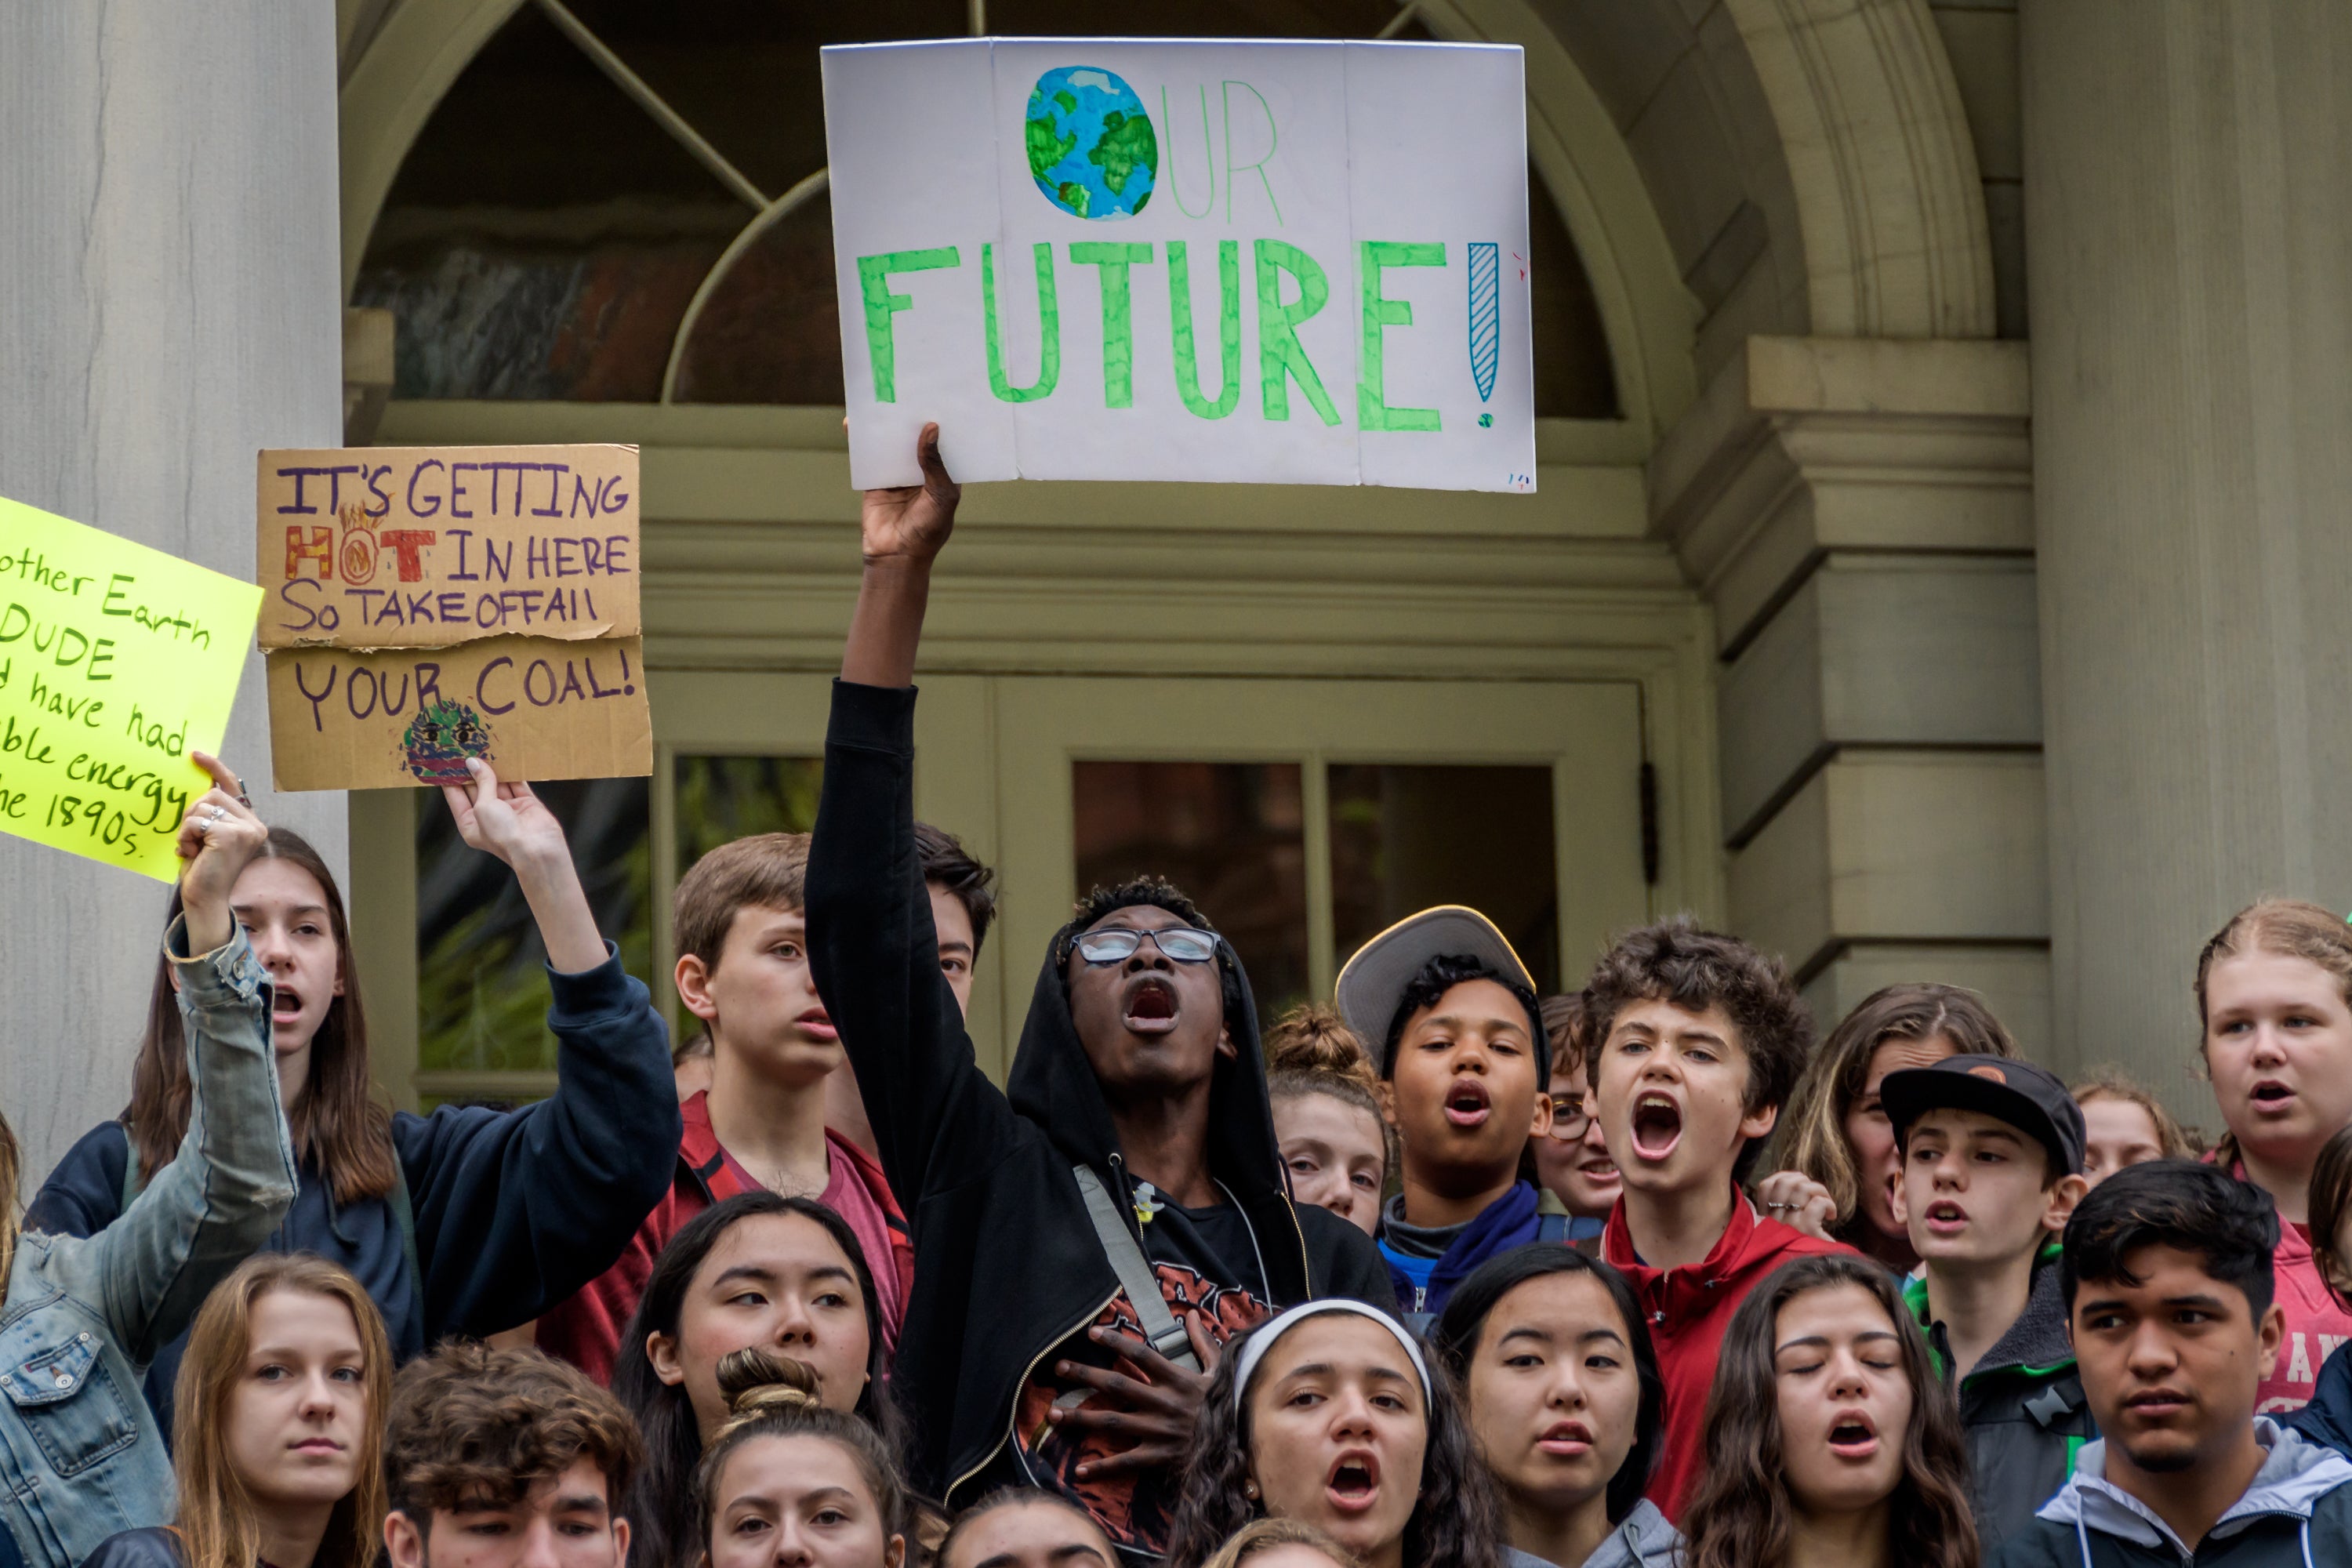 National Crises Highlight the Need for Climate Solutions Addressing Racial, Economic and Environmental Justice - Earthjustice